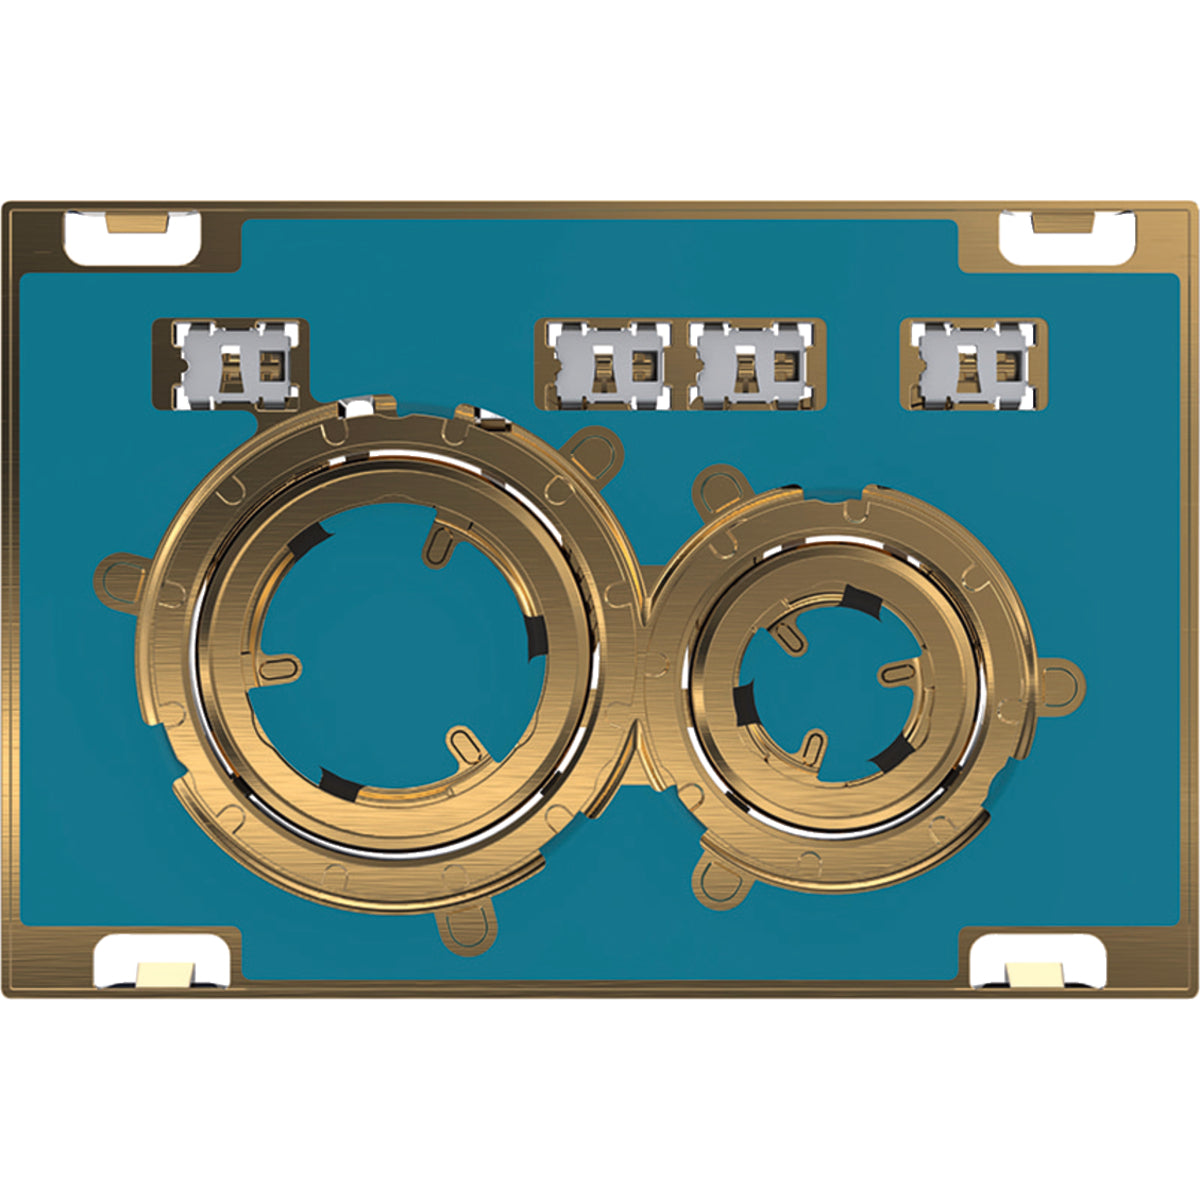 Geberit 115.652.00.1- Geberit actuator plate Sigma21 for dual flush, metal colour brass: brass, customised - FaucetExpress.ca